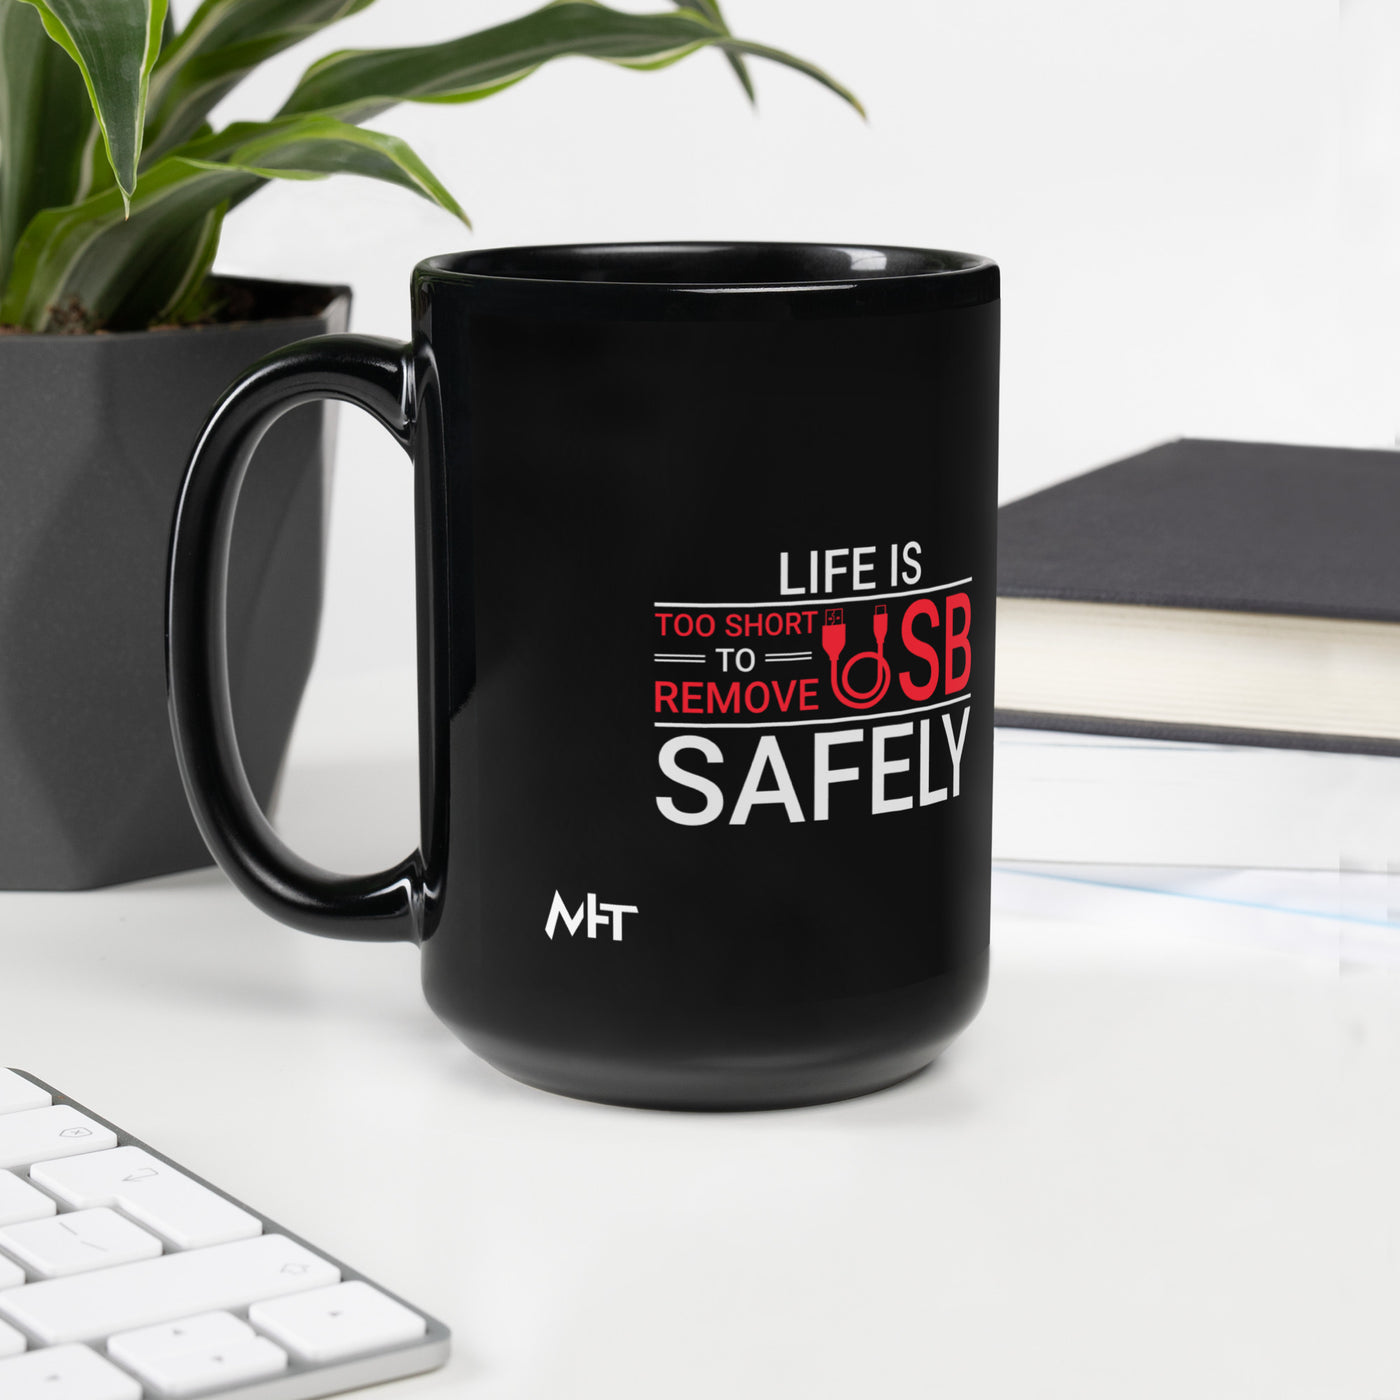 Life is too Short to Remove USB Safely - Black Glossy Mug